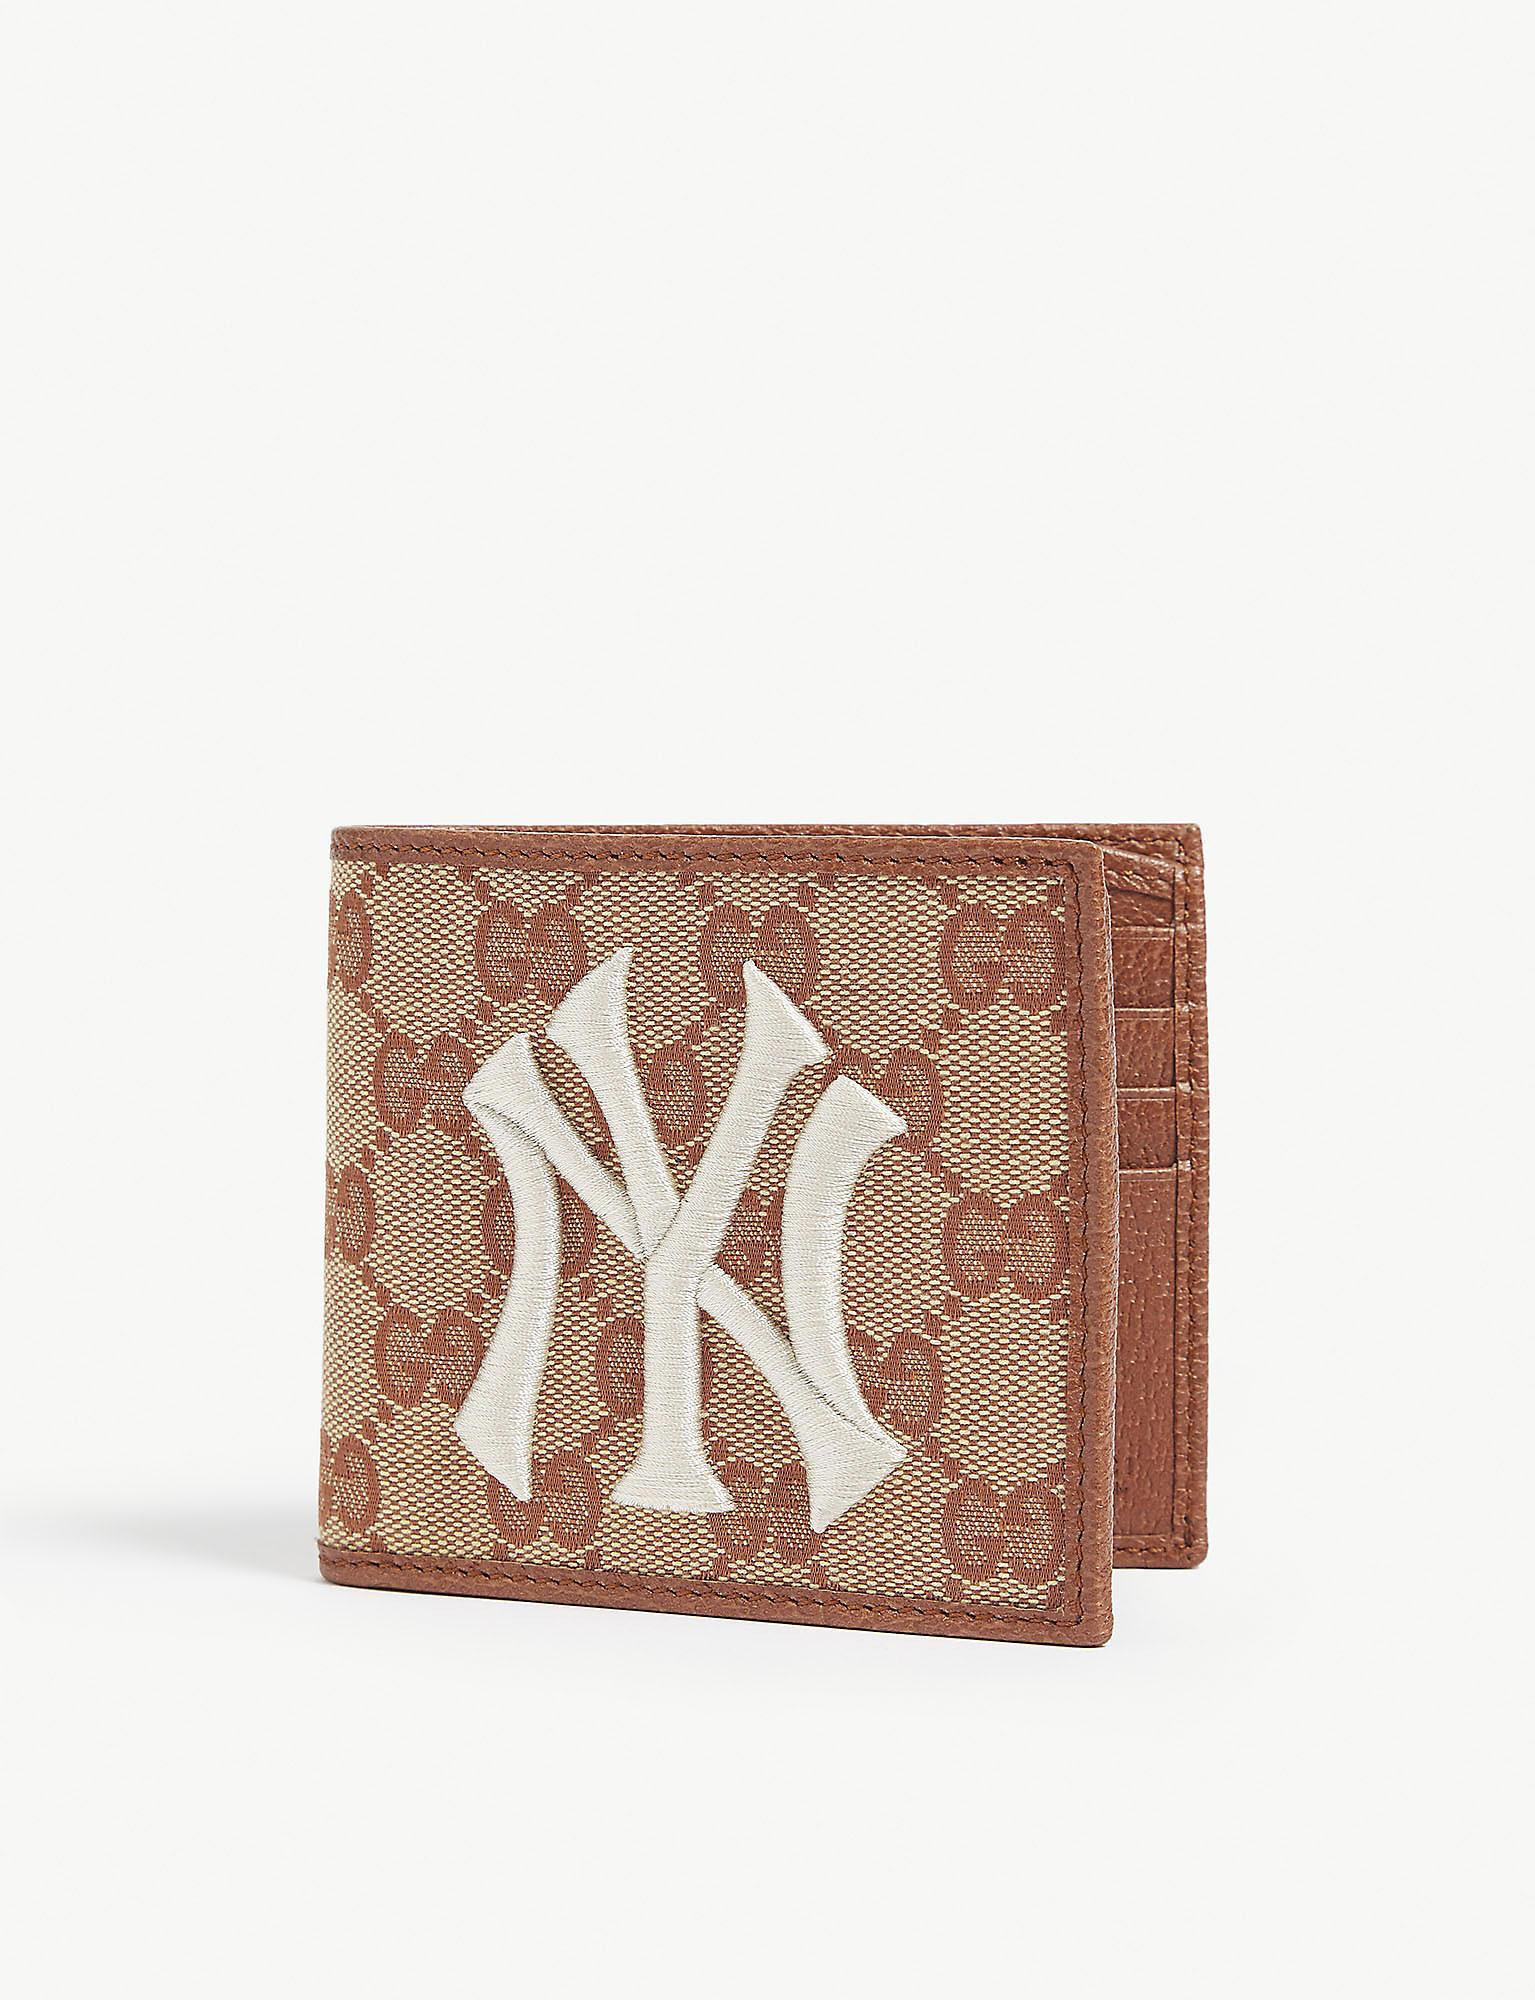 GUCCI Zip Around NY New York Yankees Patch Wallet Brown 547791-US